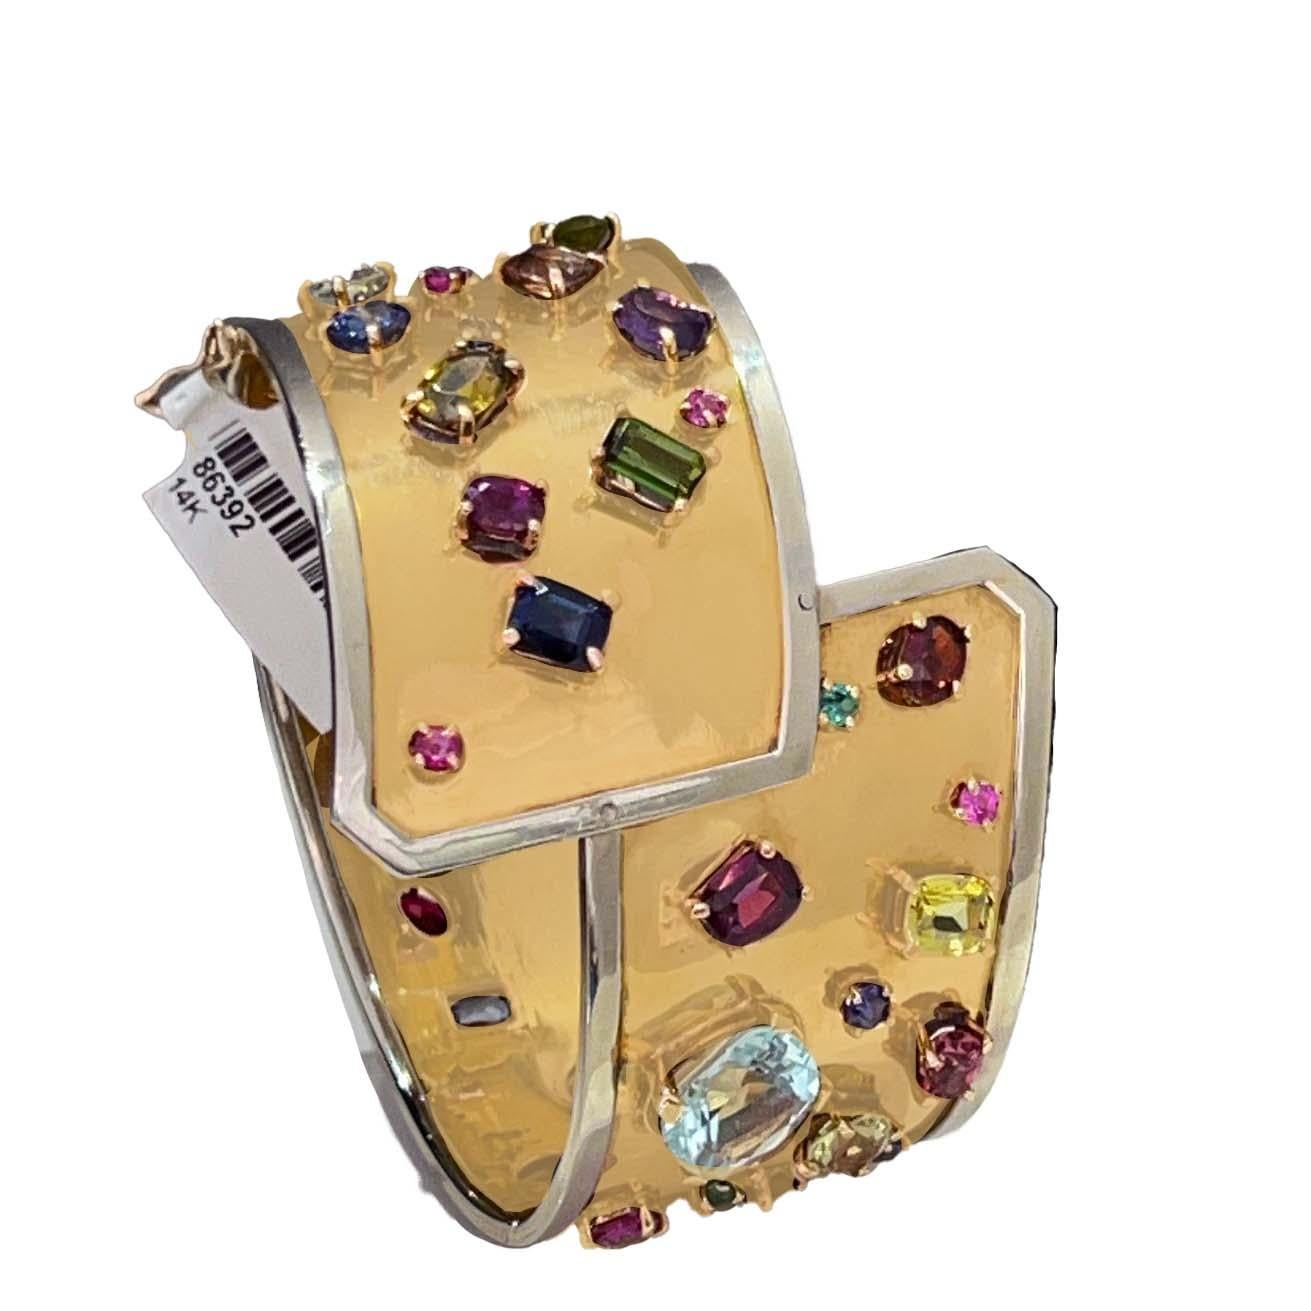 This 1970s 14 karat yellow gold multicolor semi precious gemstone cuff bracelet. Featuring a captivating wraparound yellow gold motif adorned with vibrant gemstones, creating a dynamic and eye-catching look. The border of the bracelet surrounds the